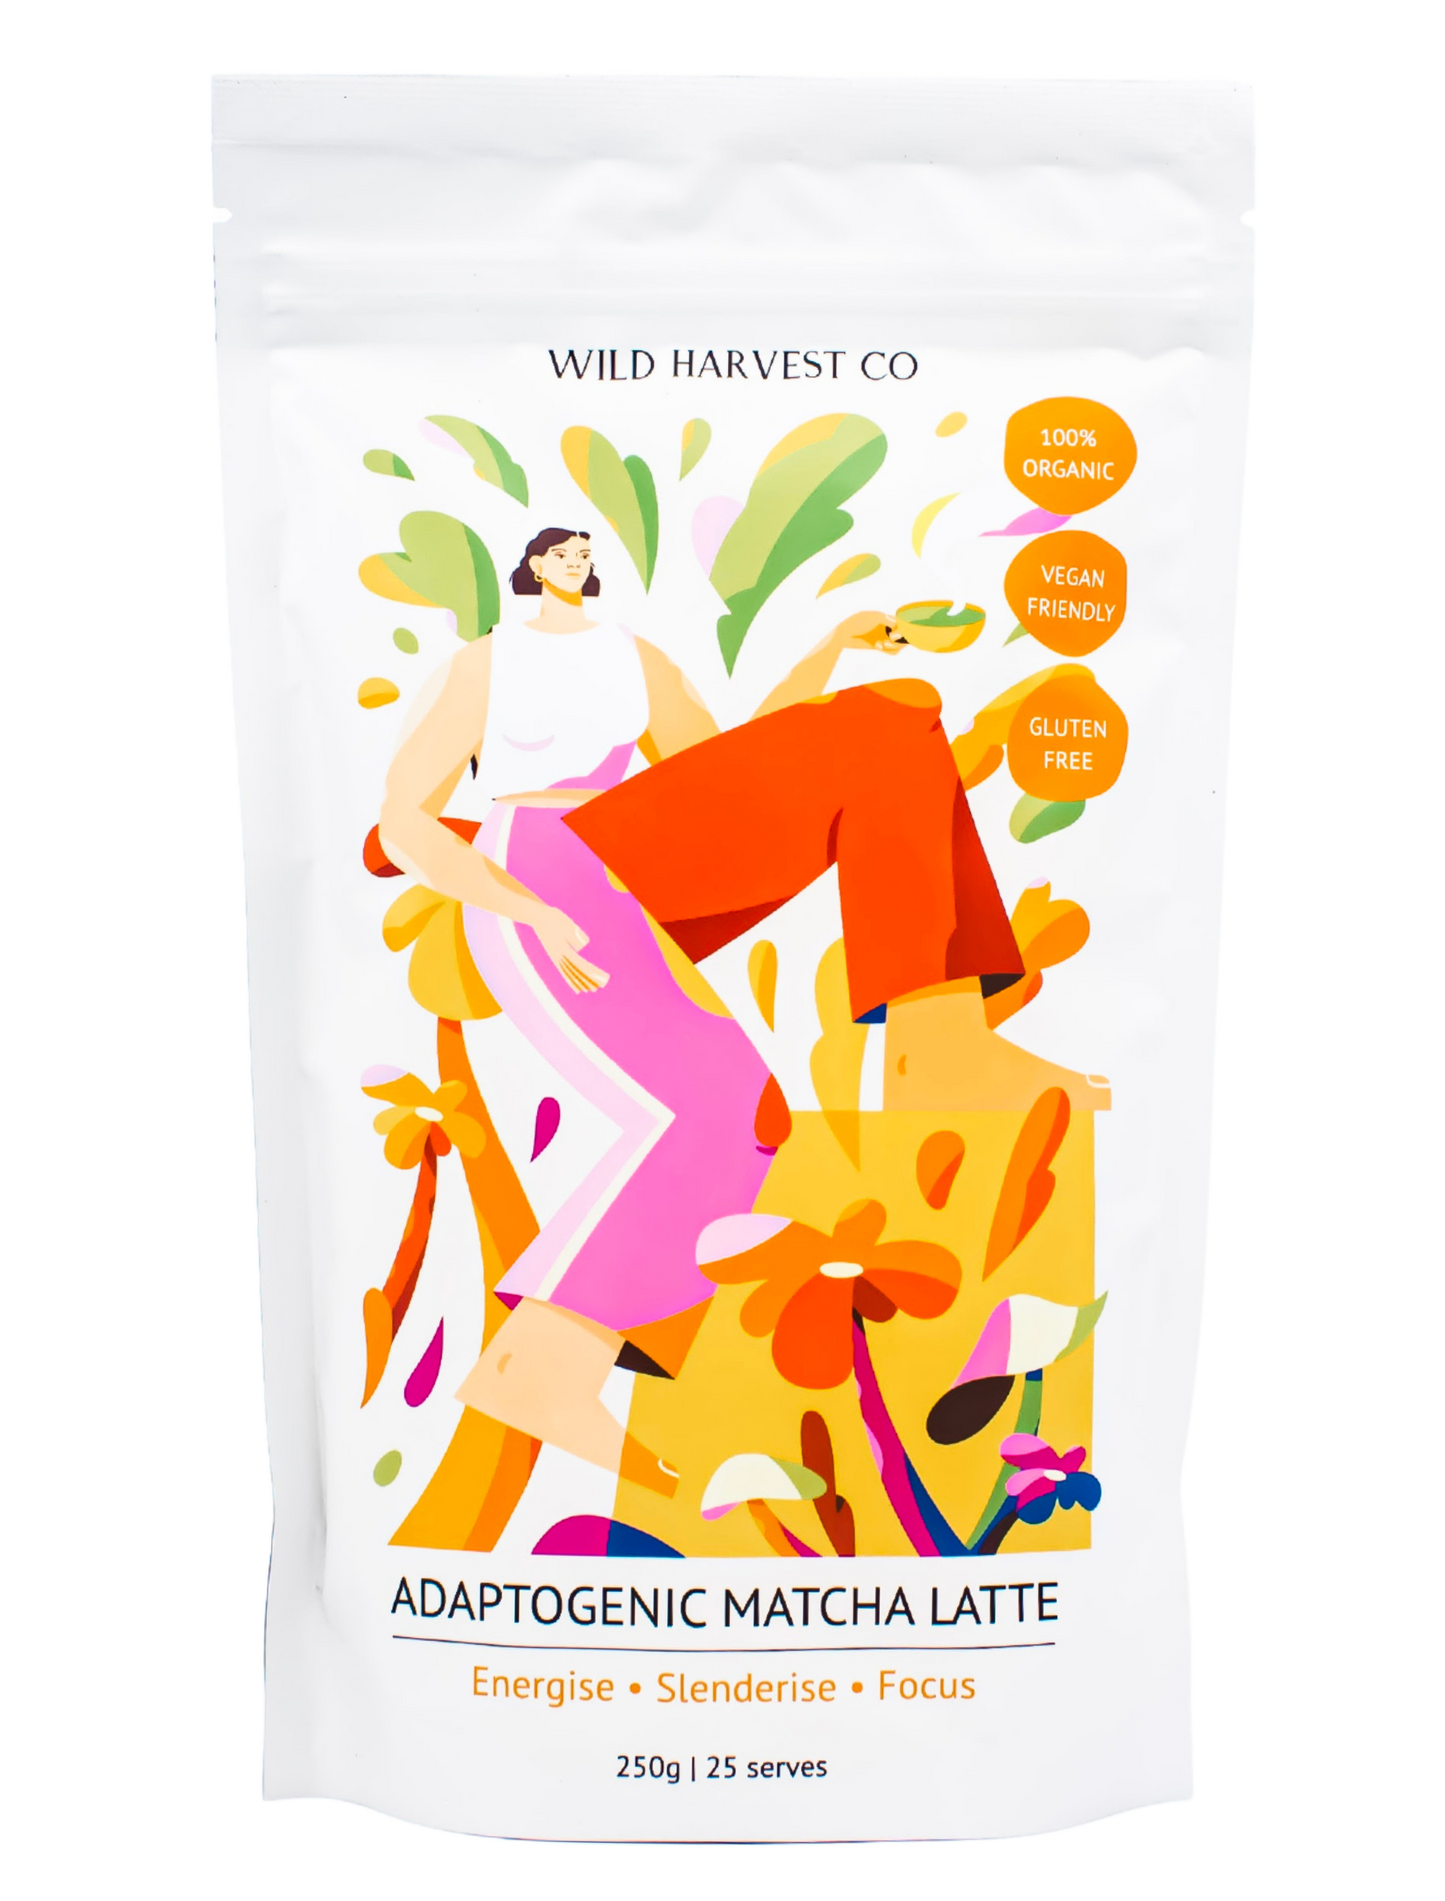 Wild Harvest Co Adaptogenic Matcha Latte Pouch with the illustration of a woman sitting down and holding a hot cup of matcha latte amongst a field of flowers